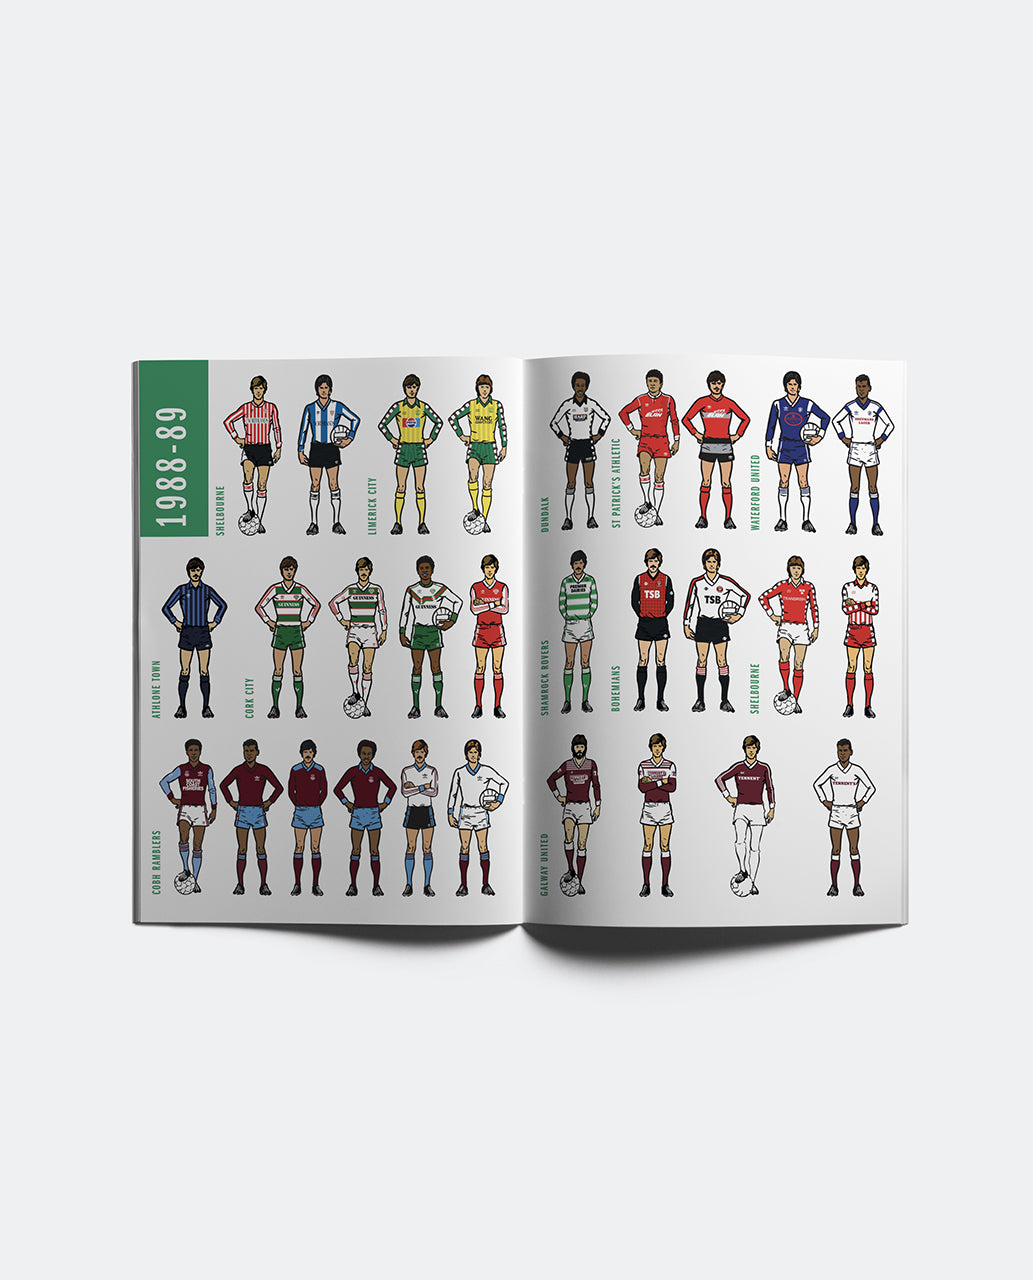 The League of Ireland 1980–1990: An Illustrated History by Peter O'Toole & Bartley Ramsay